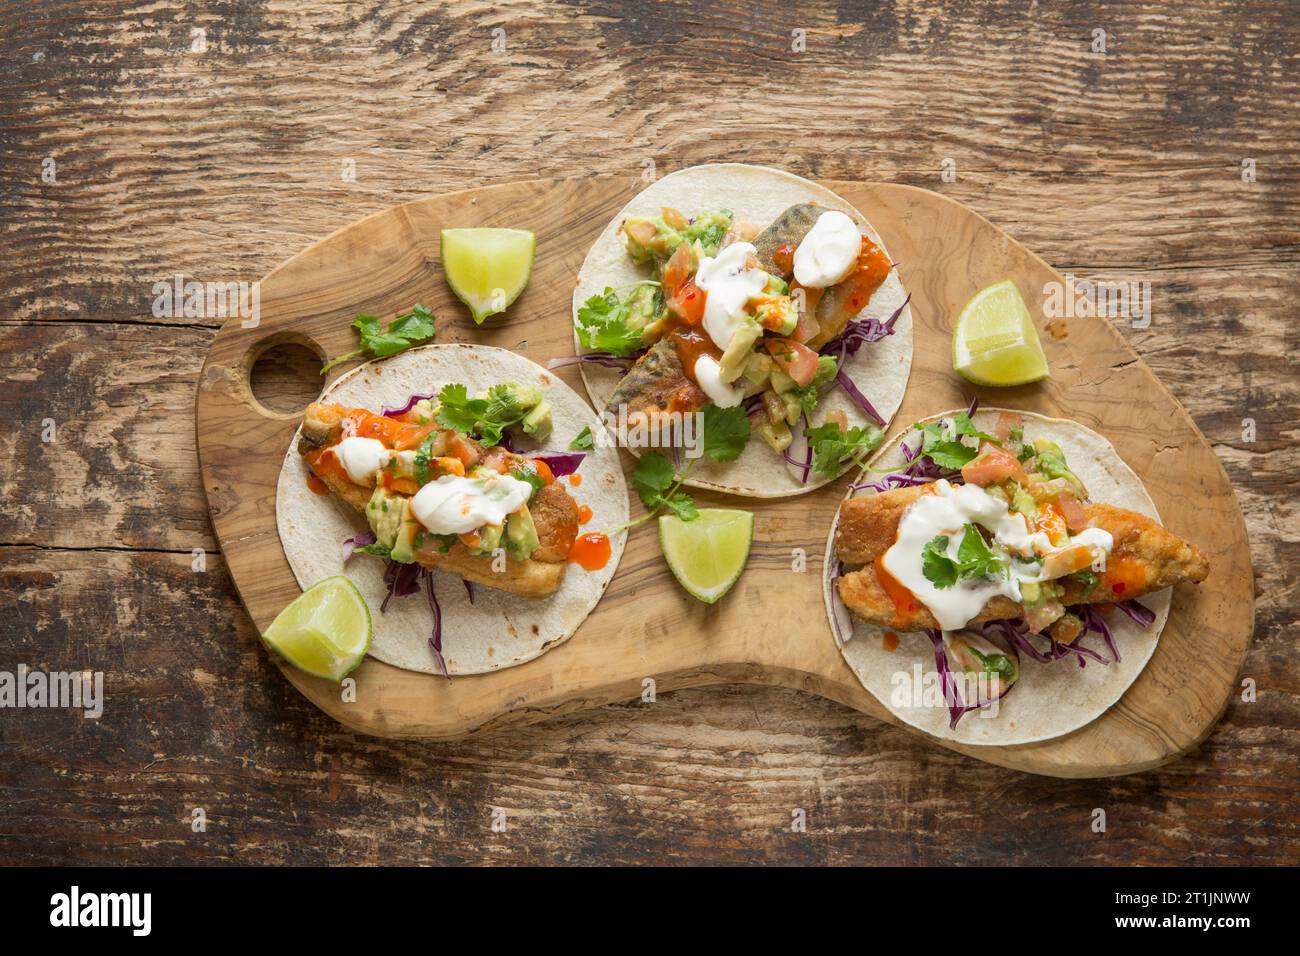 Mackerel tacos made with fresh fried mackerel, Scomber scombrus, served with salsa and soured cream. Dorset England UK GB Stock Photo